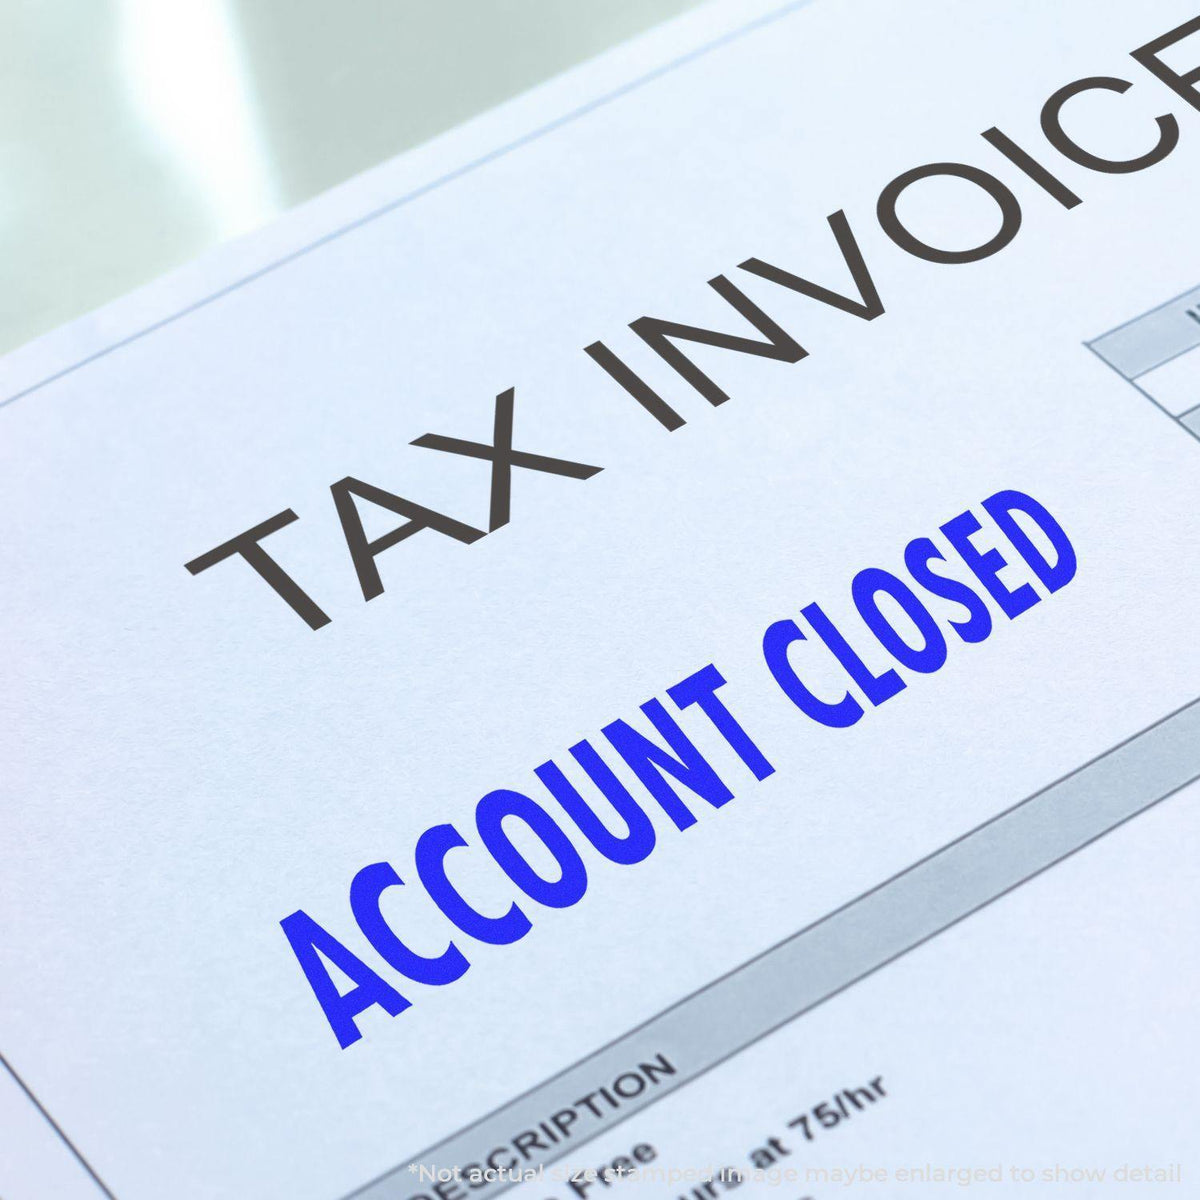 Large Self-Inking Account Closed Stamp image, showing &quot;ACCOUNT CLOSED&quot; message in large blue font on the tax invoice.